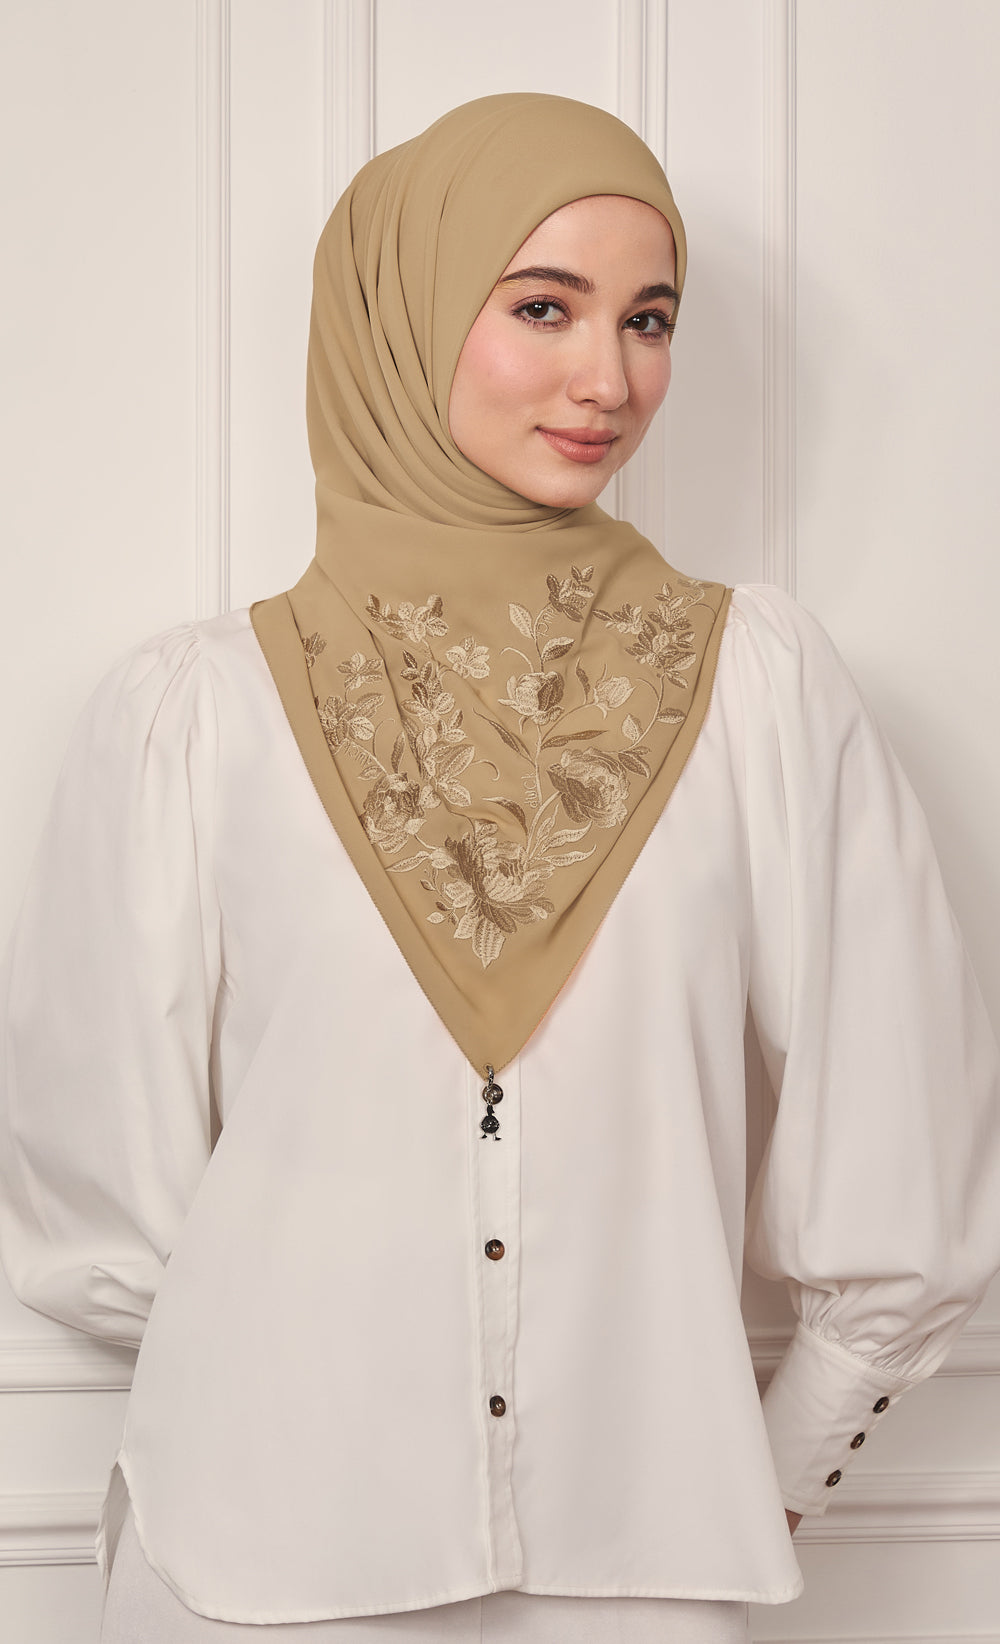 The Peonies Embroidery dUCk Square Scarf in Sand